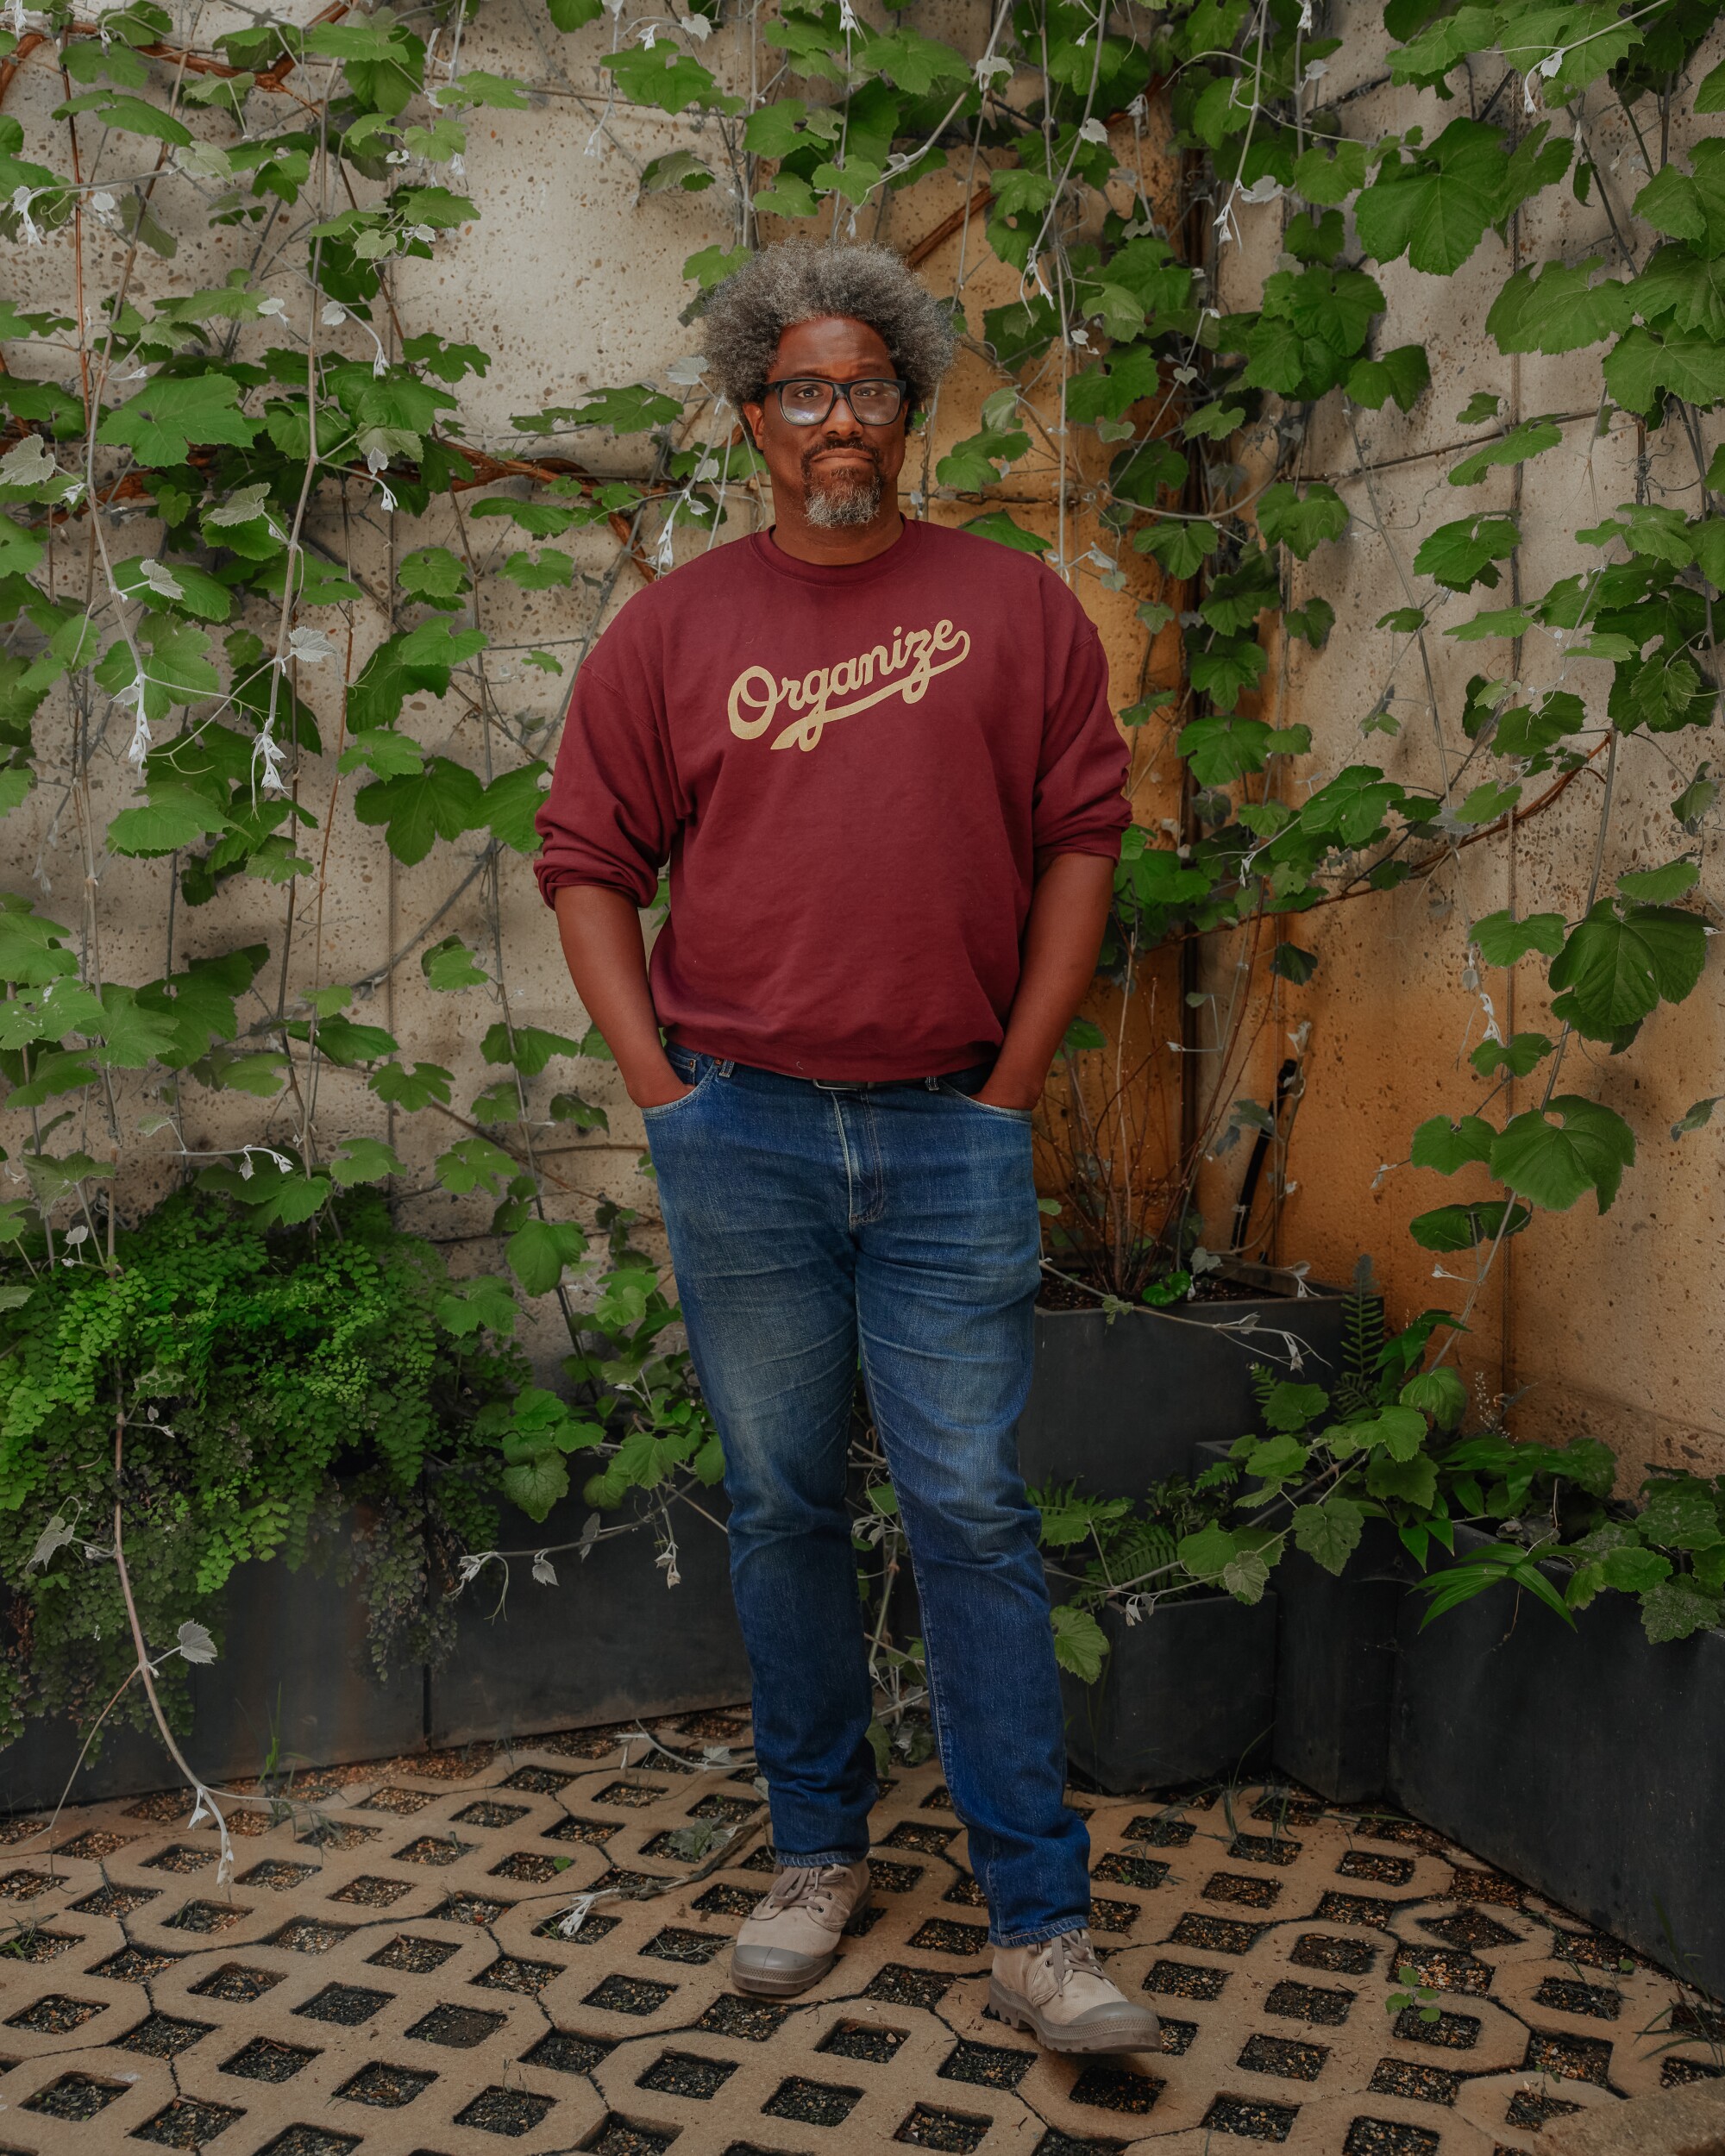 A man in a red sweater in front of a vine wall